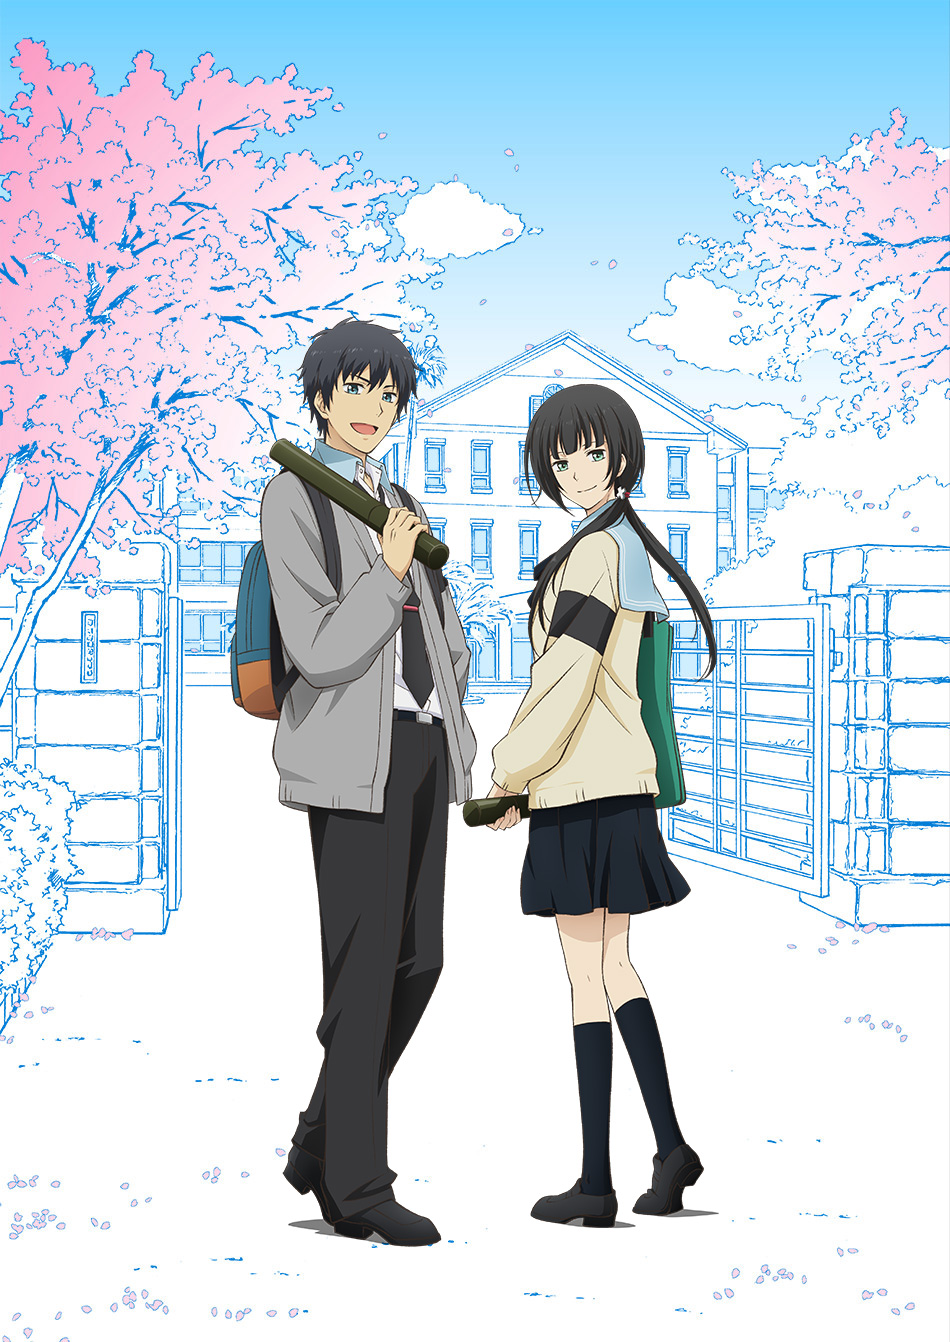 Relife Final Chapter Releases March 21 Visual Commercial